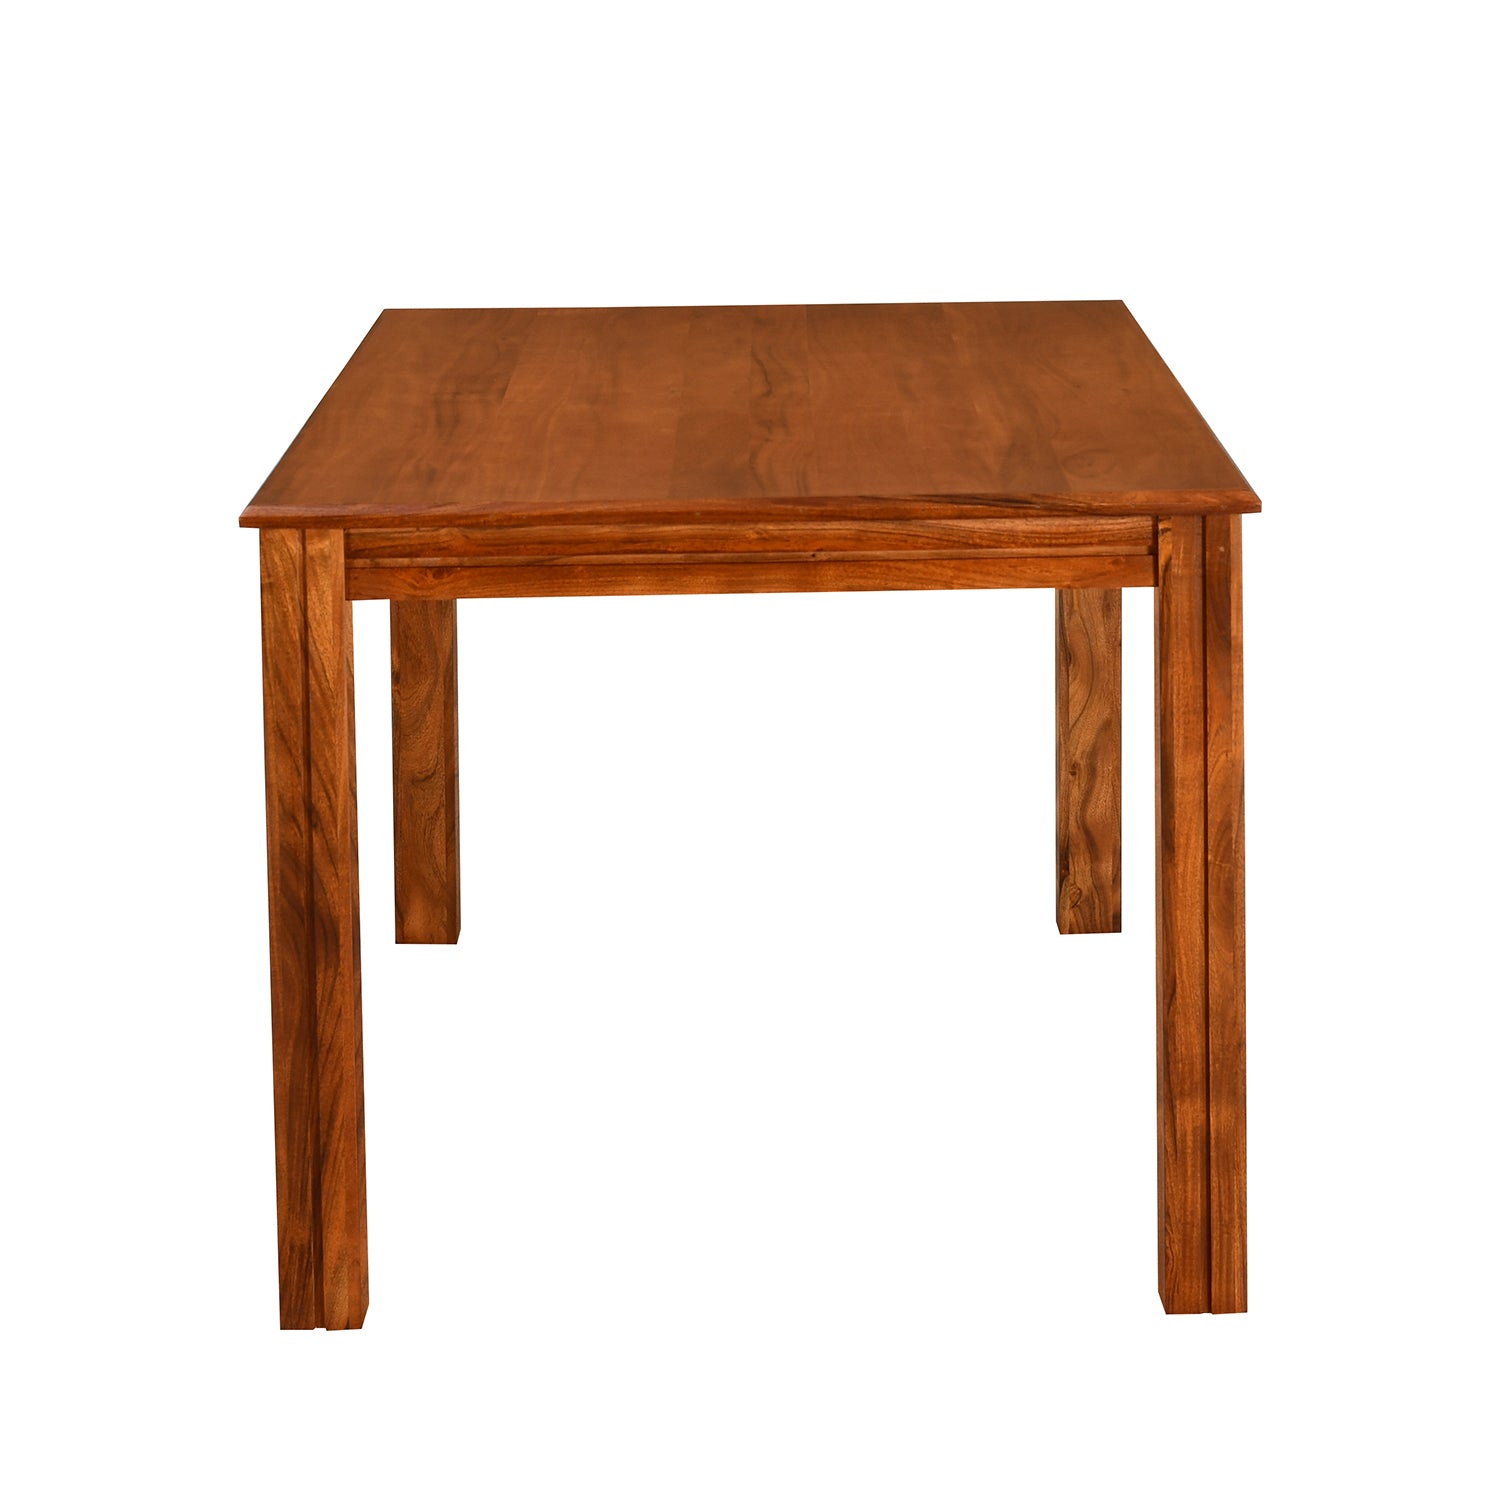 Cera 6 Seater Solid Wood Dining Table (Honey Brown)